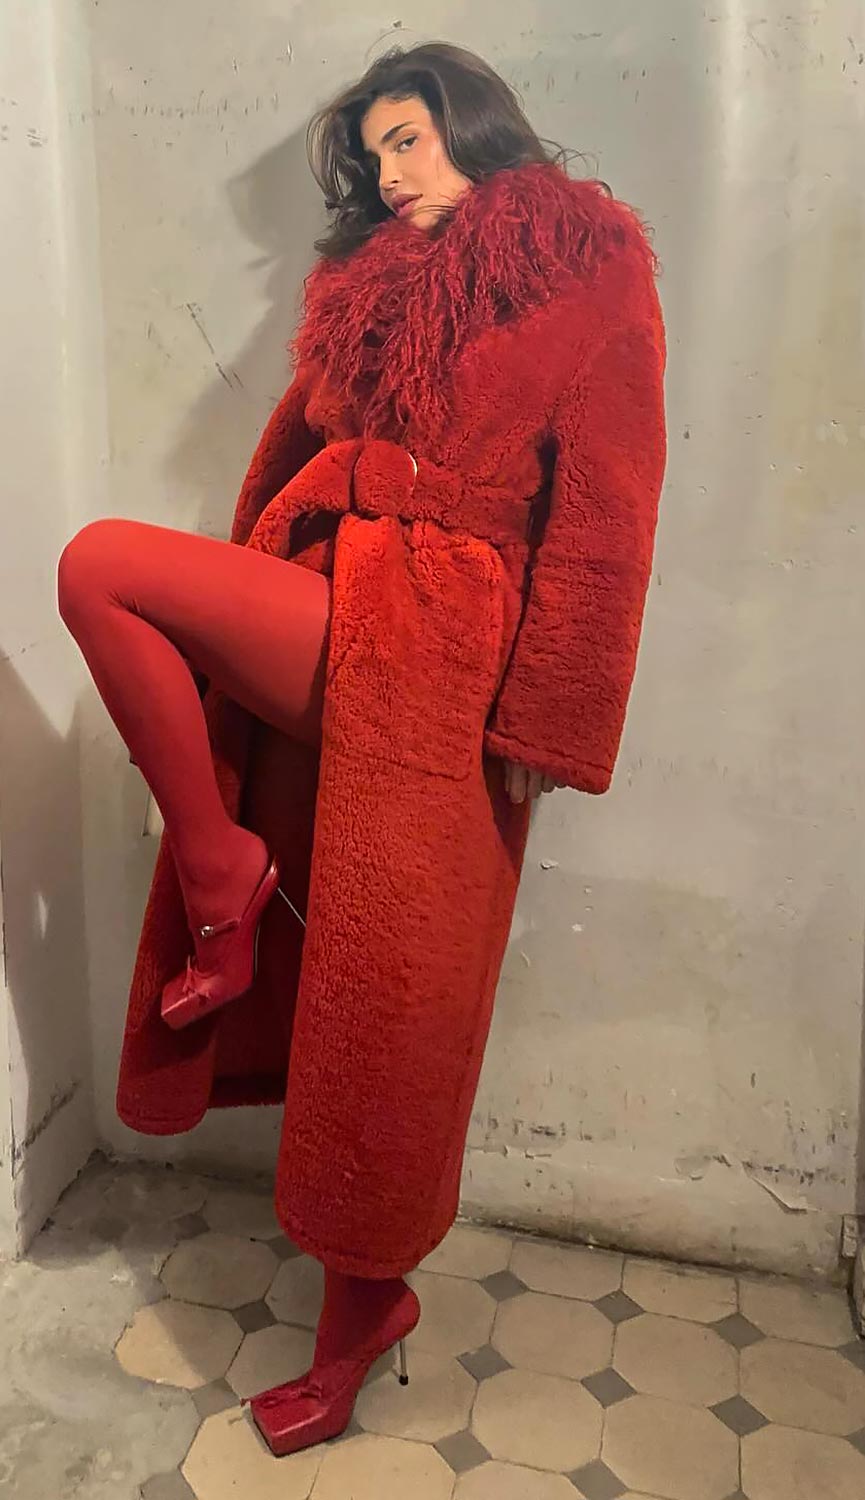 Kylie Jenner in All red